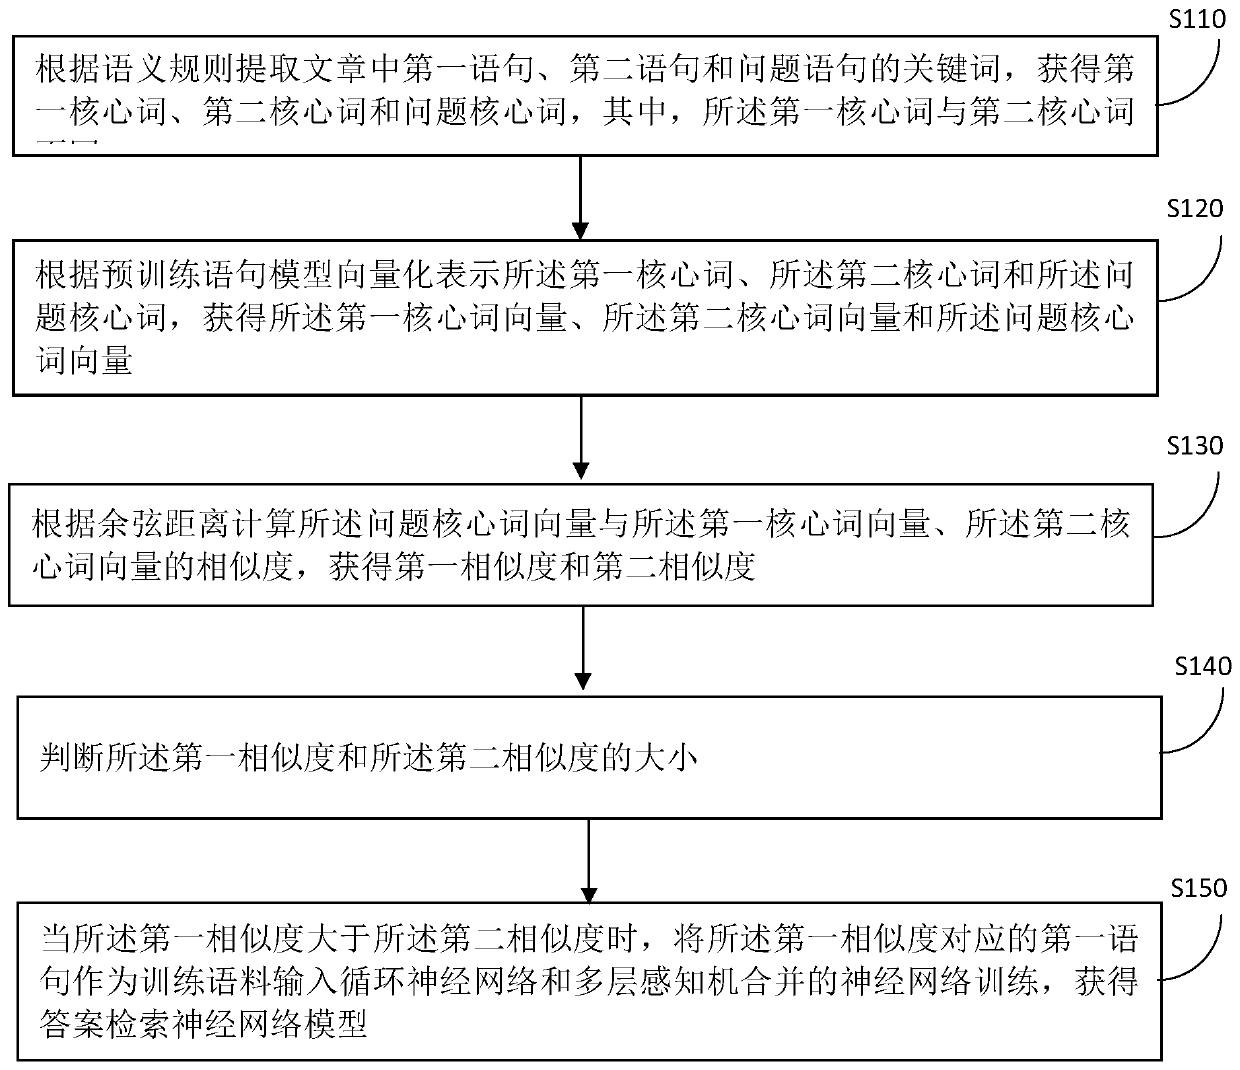 Article reading comprehension answer retrieval system and device based on machine learning